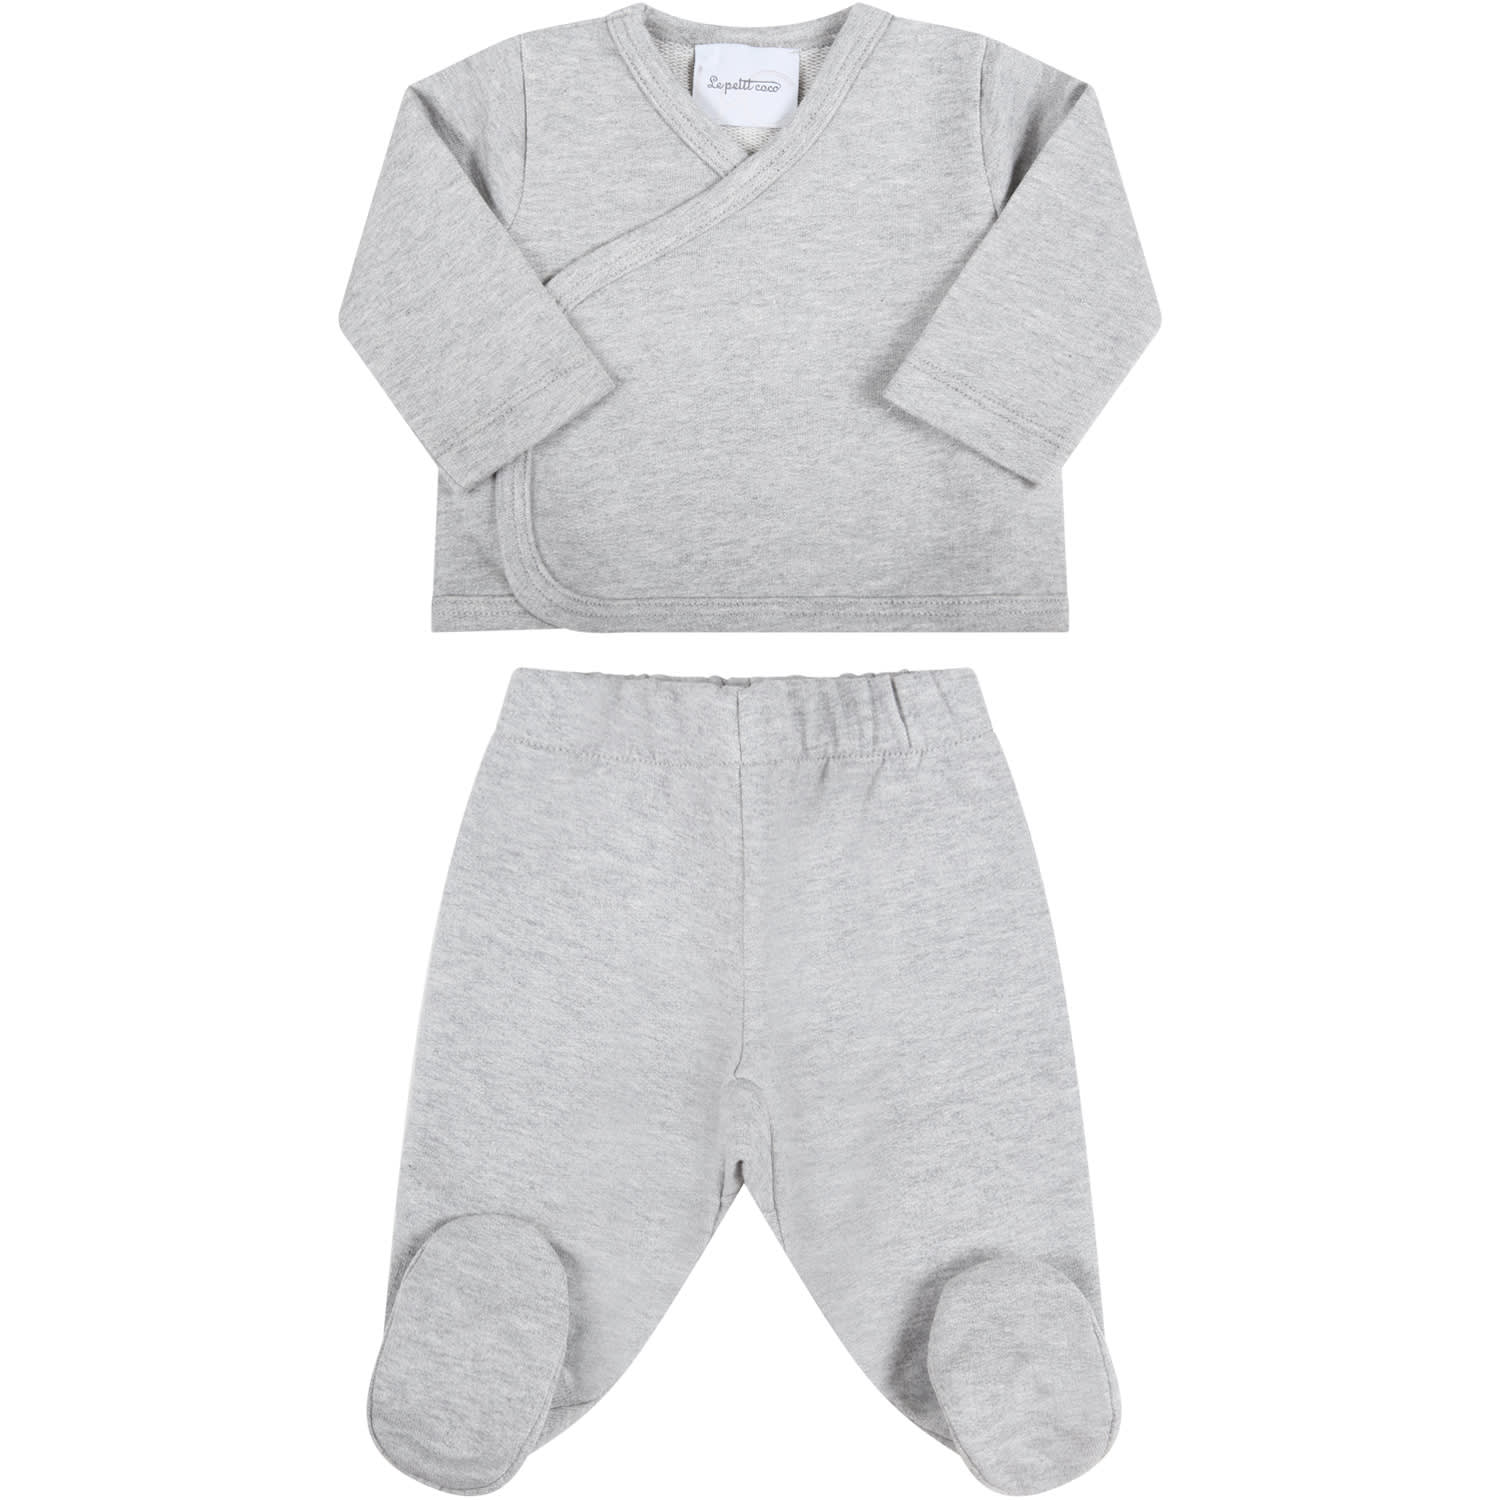 Le Petit Coco Grey Suit For Baby Kids